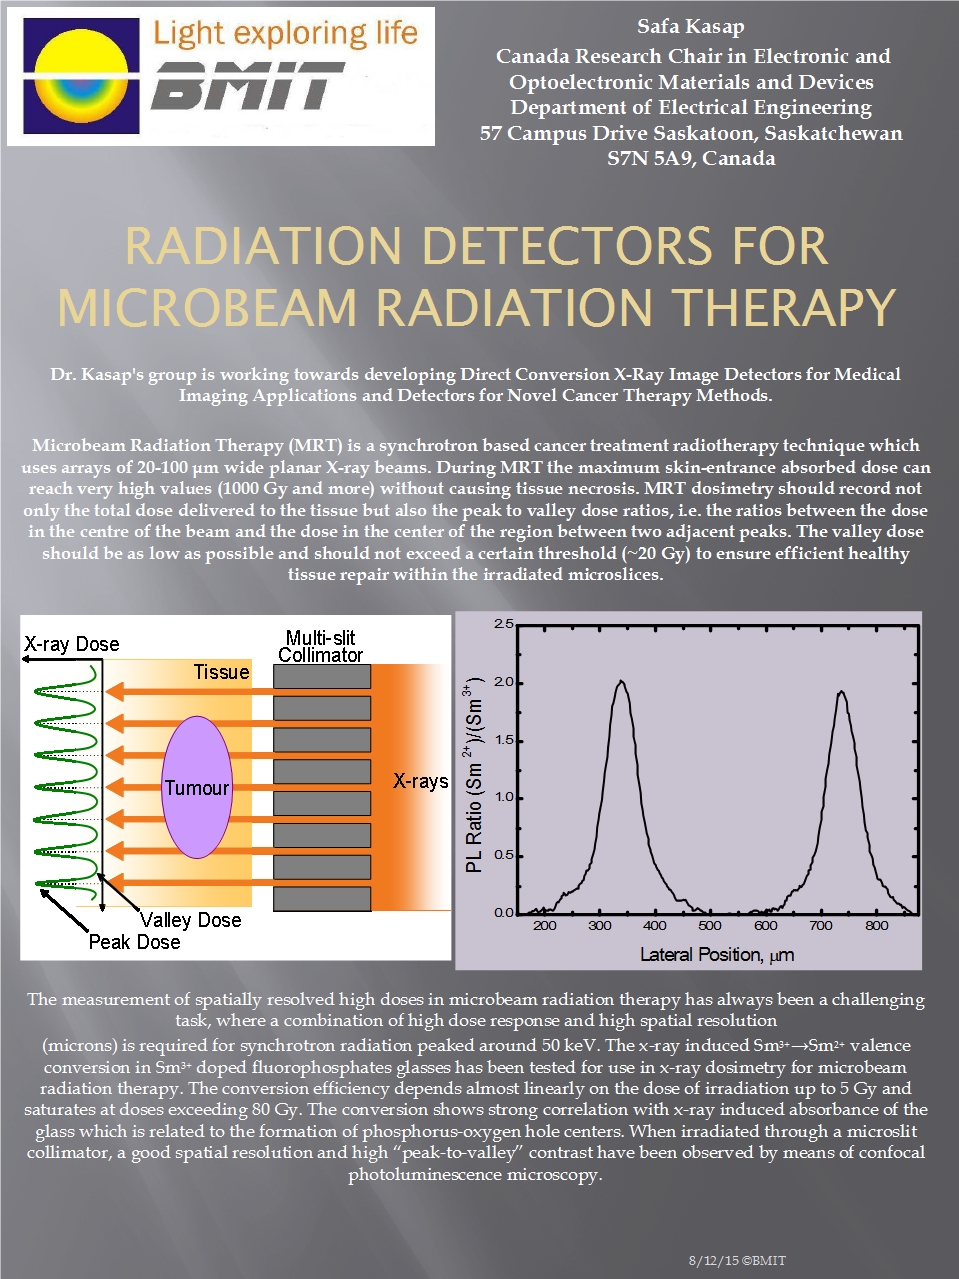 Radiation Detectors for Micro-Beam Radiation Therapy Image